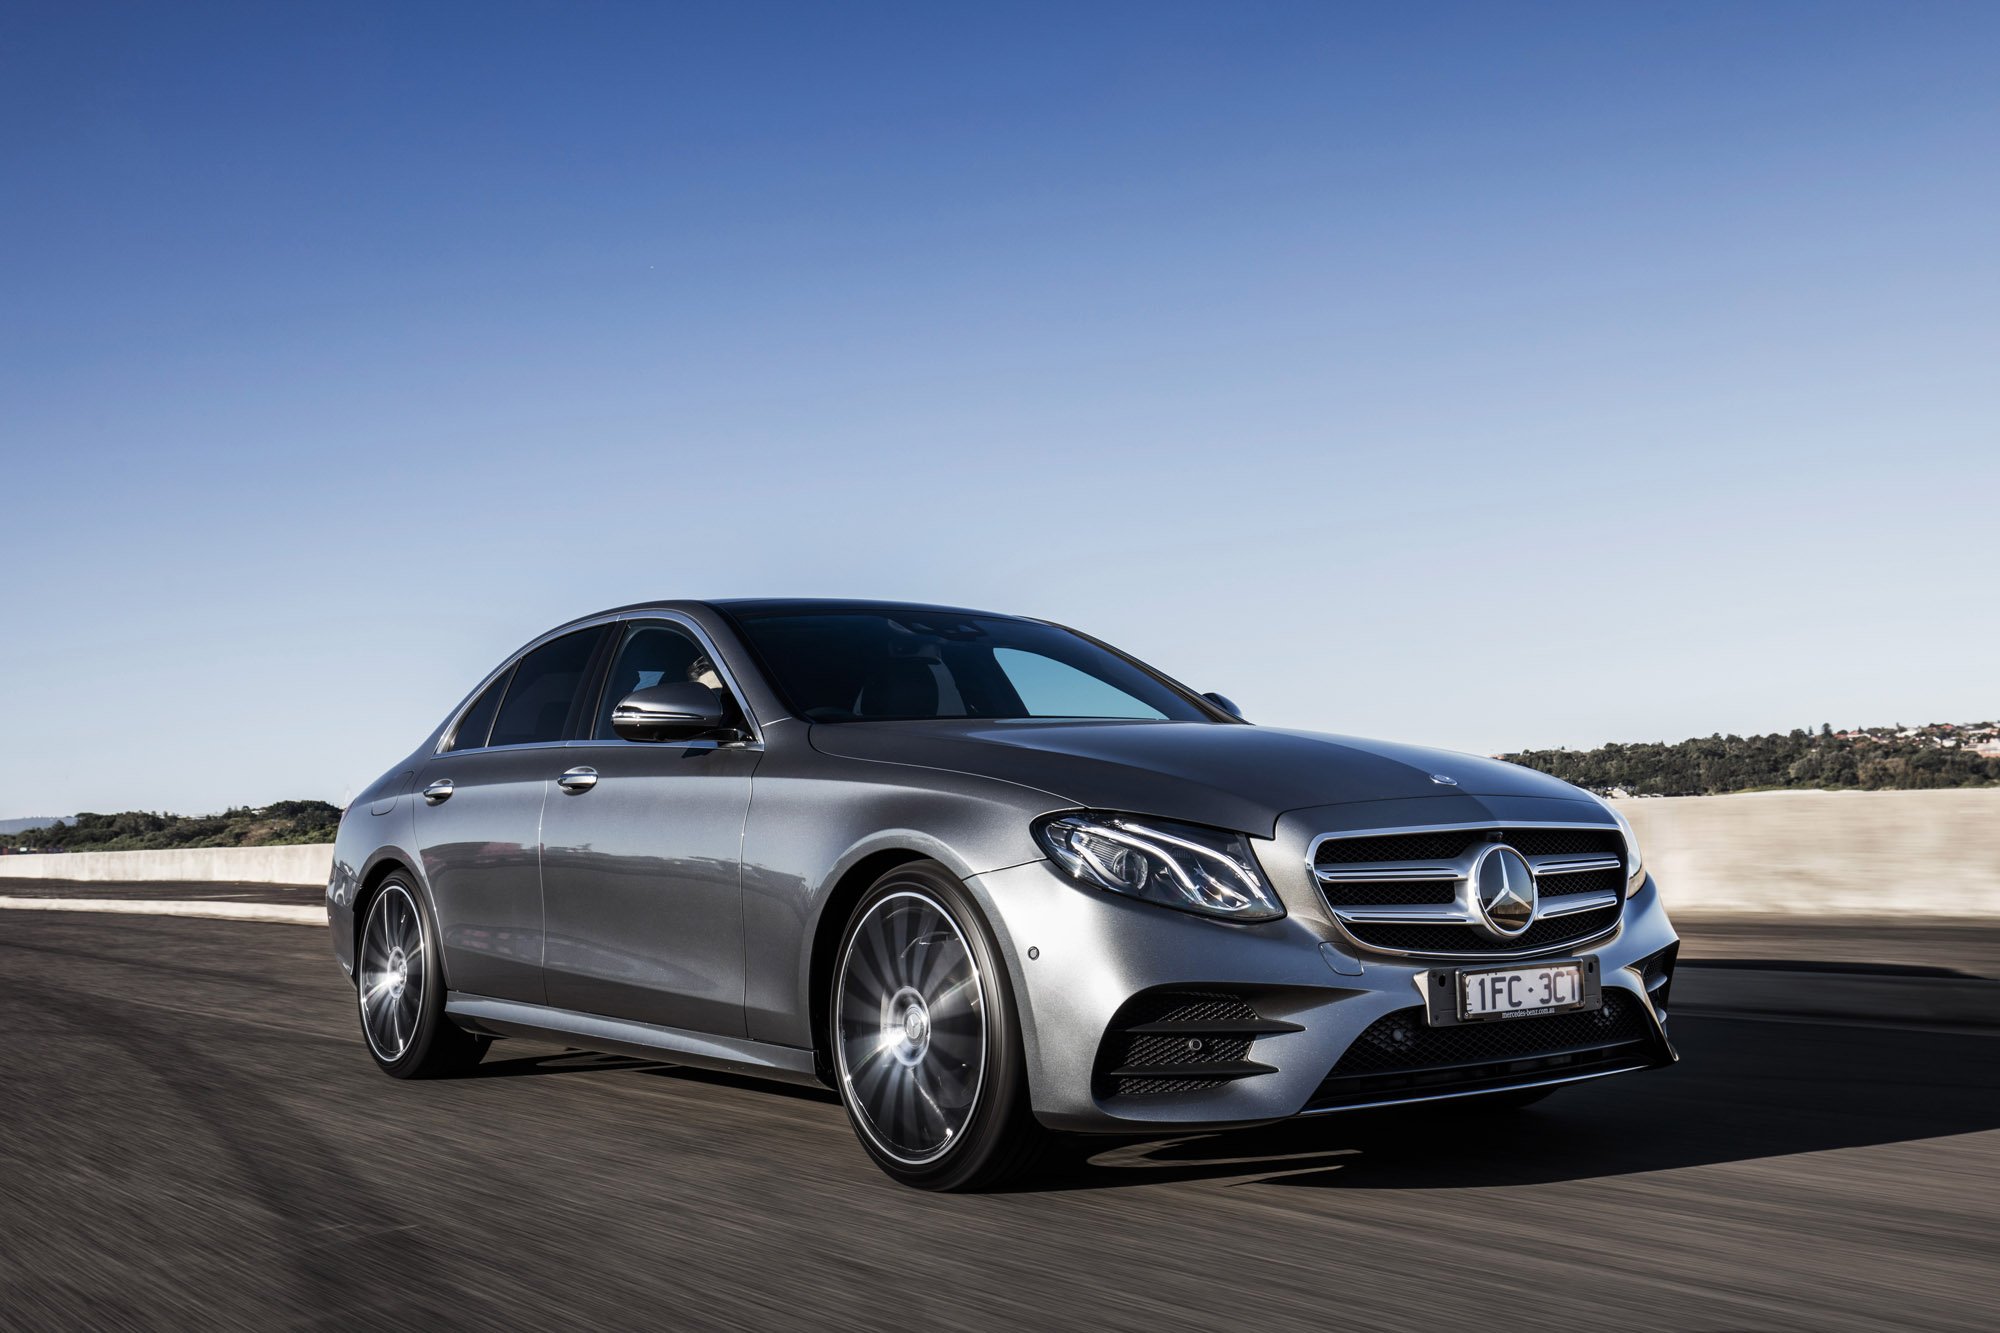 2016 Mercedes-Benz E-Class pricing and specifications - photos | CarAdvice